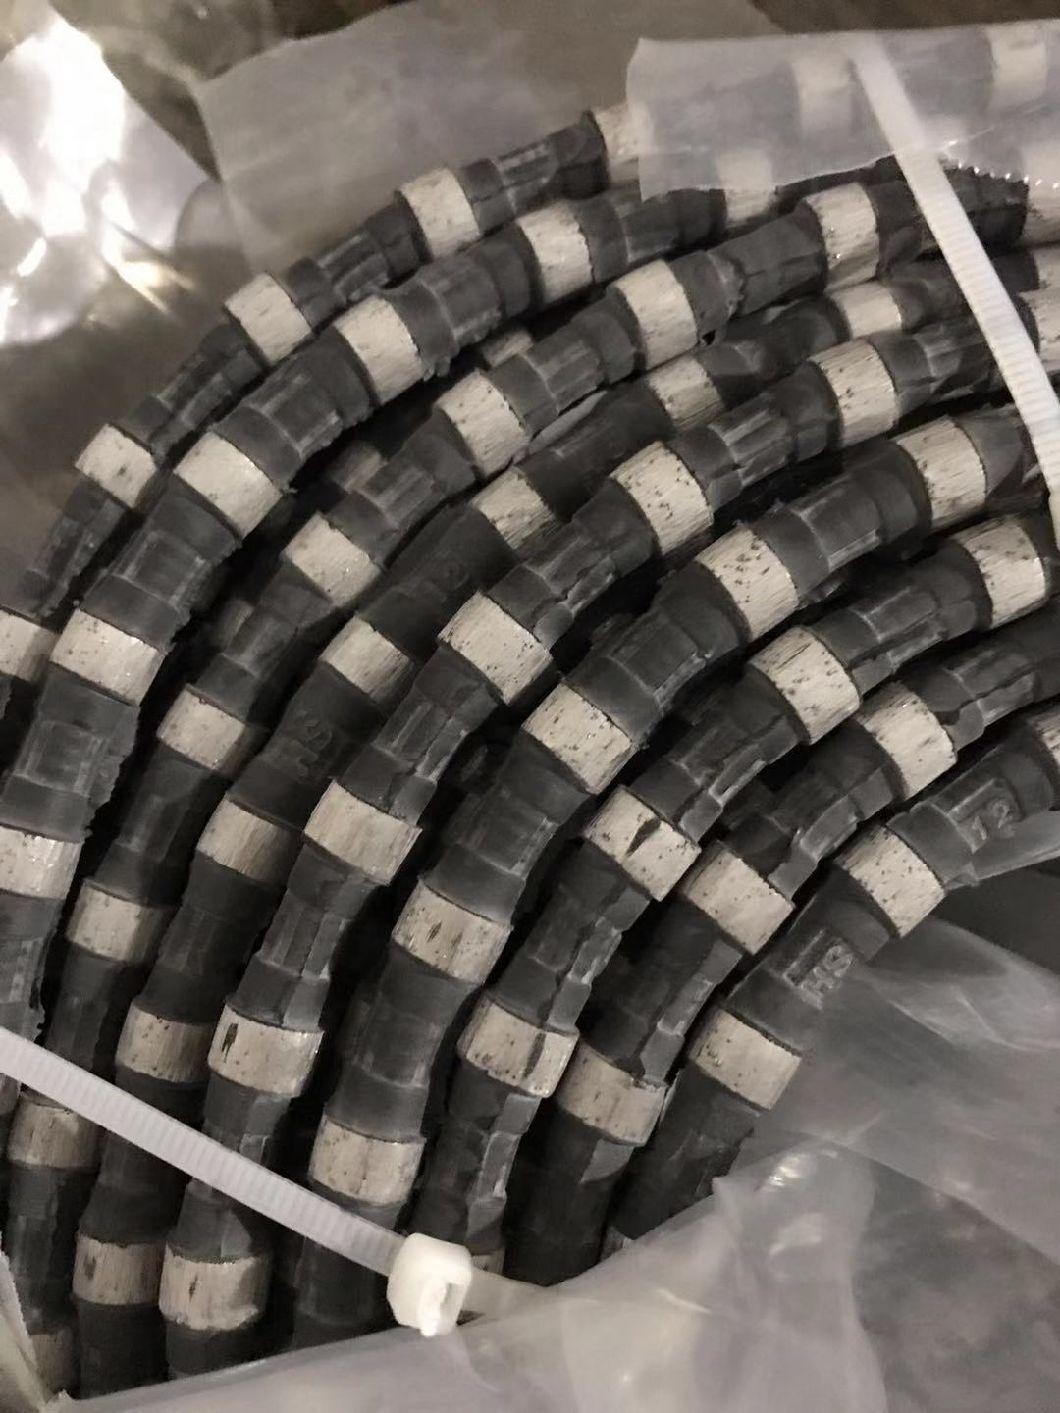 Hot Sell Diamond Wire Saw for Granite Marble Diamond Tools Cutting